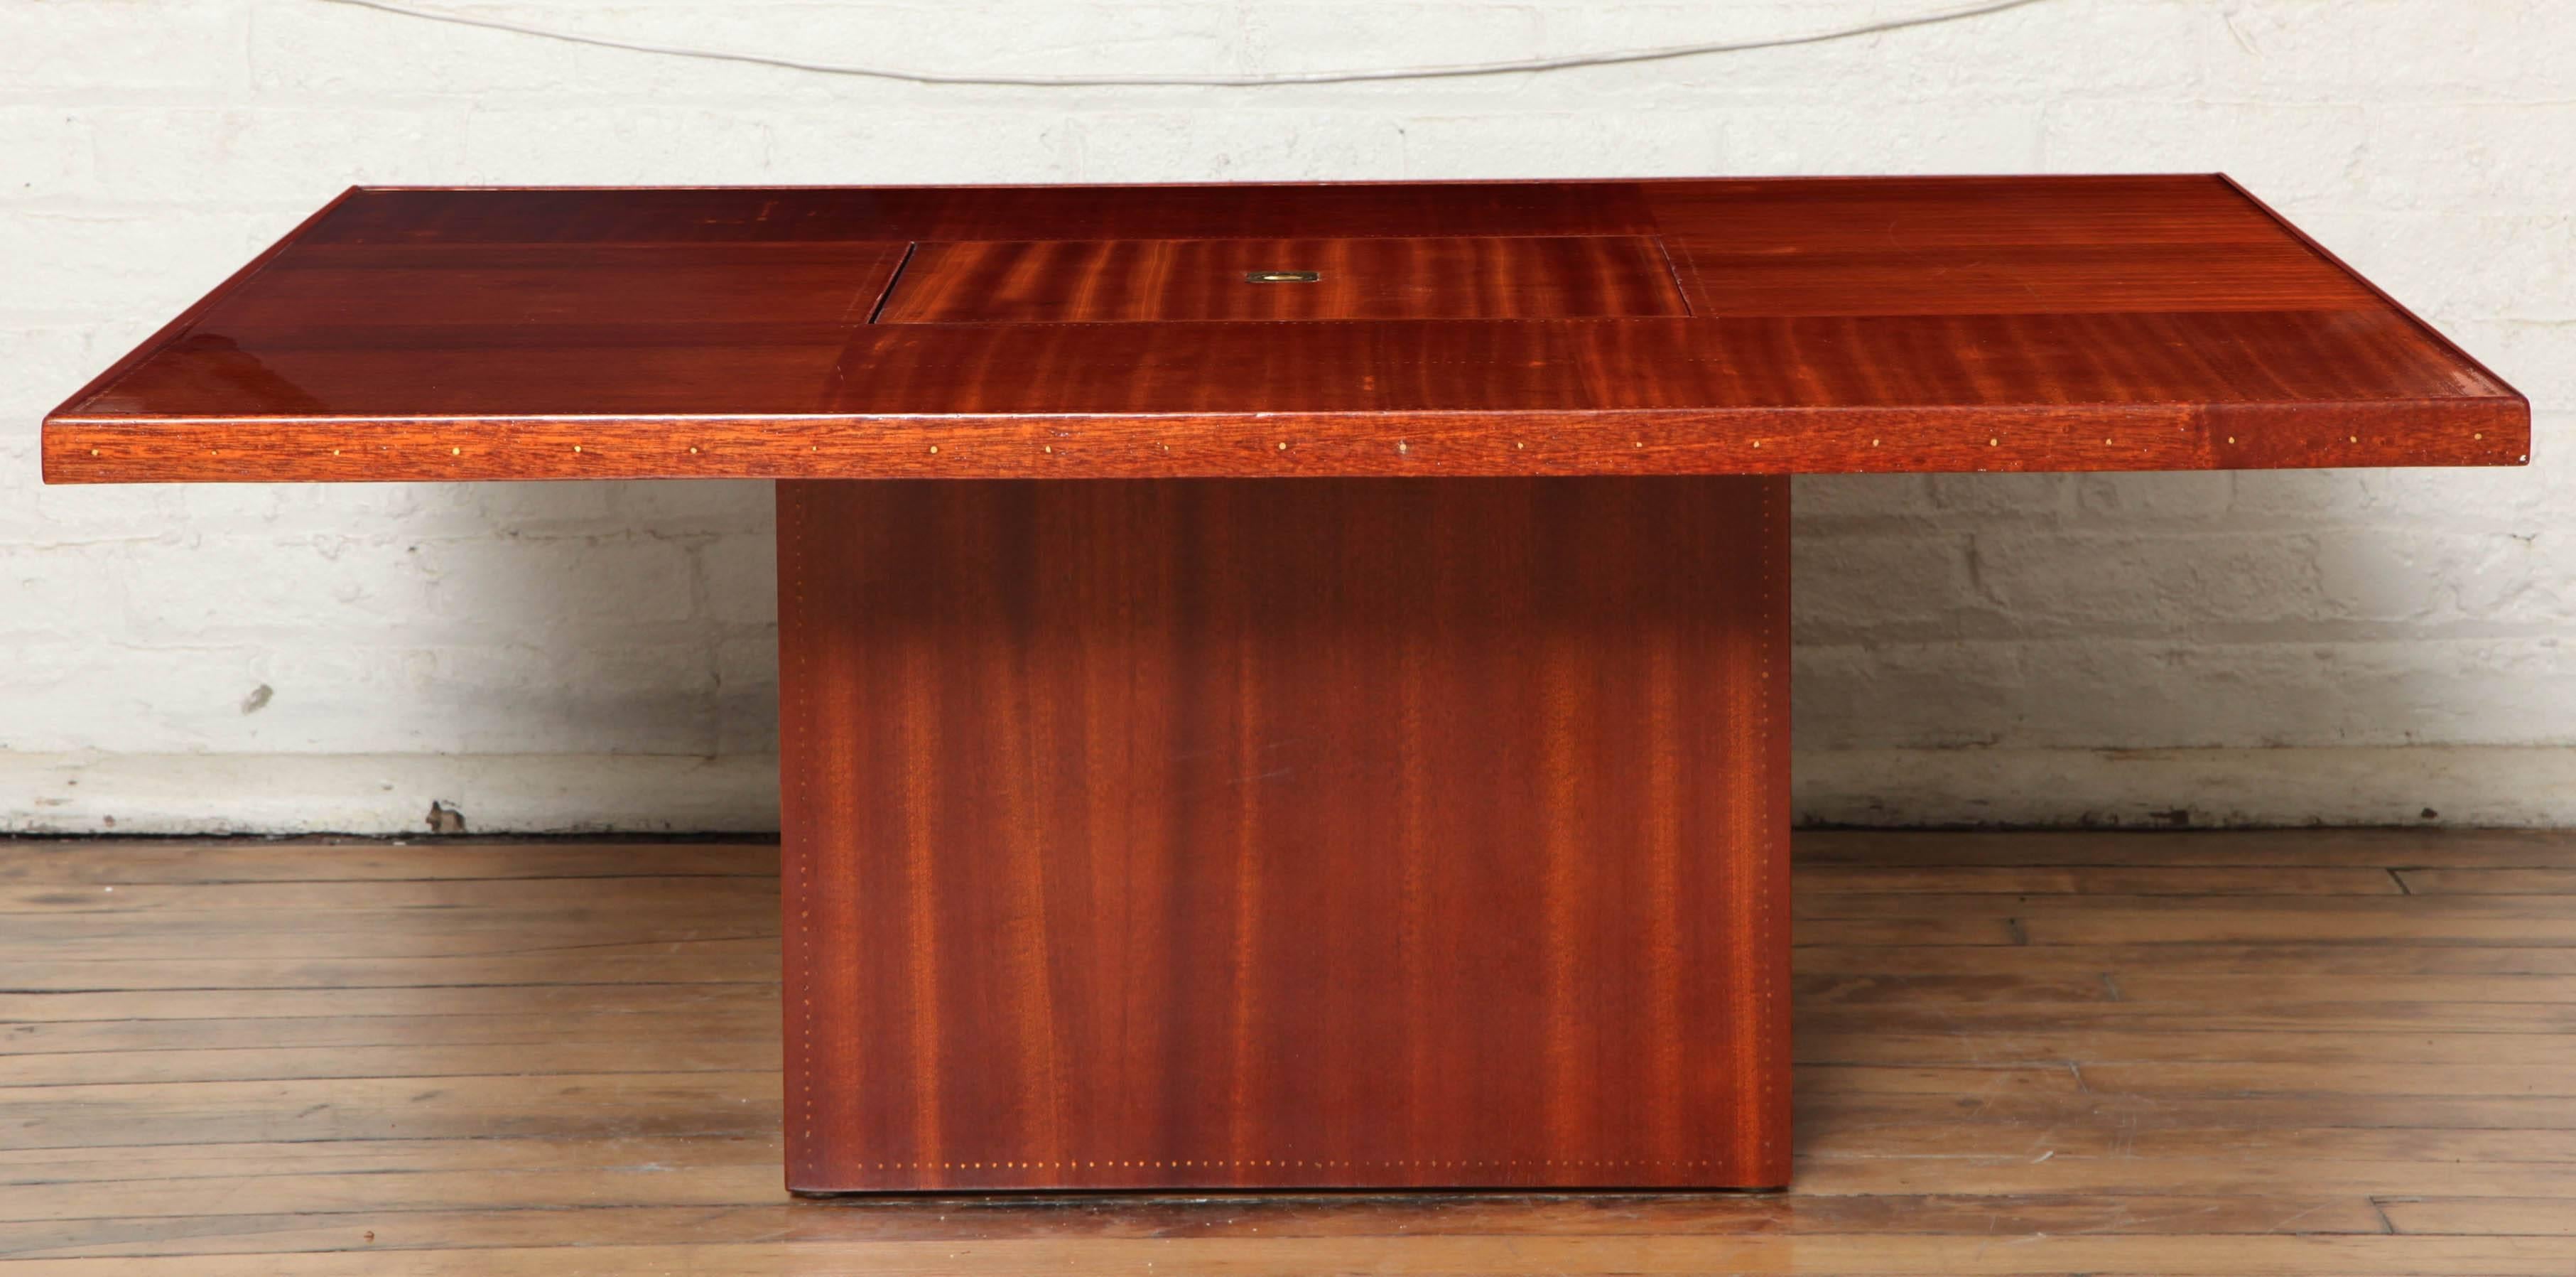 Art Deco cocktail table. Mahogany with brass nailhead details typical to Sornay's designs. Centre opens for a bar compartment. By Andre Sornay.

Bibliography Andre Sornay by Thierry Roche Page 101.